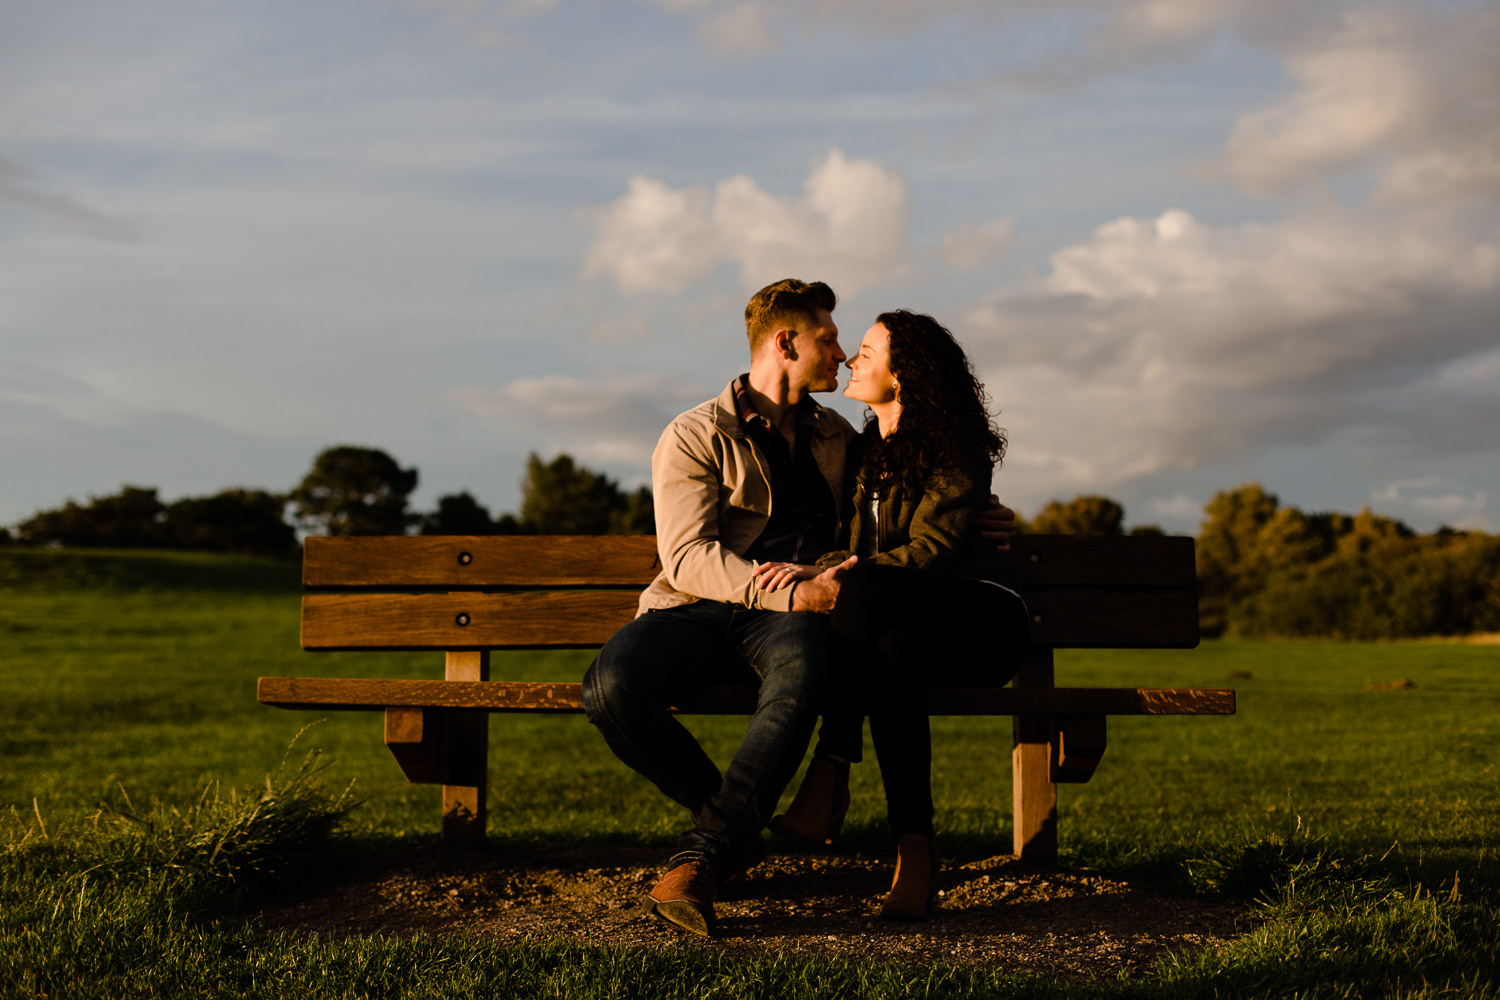 A couple close together on a bench at sunset